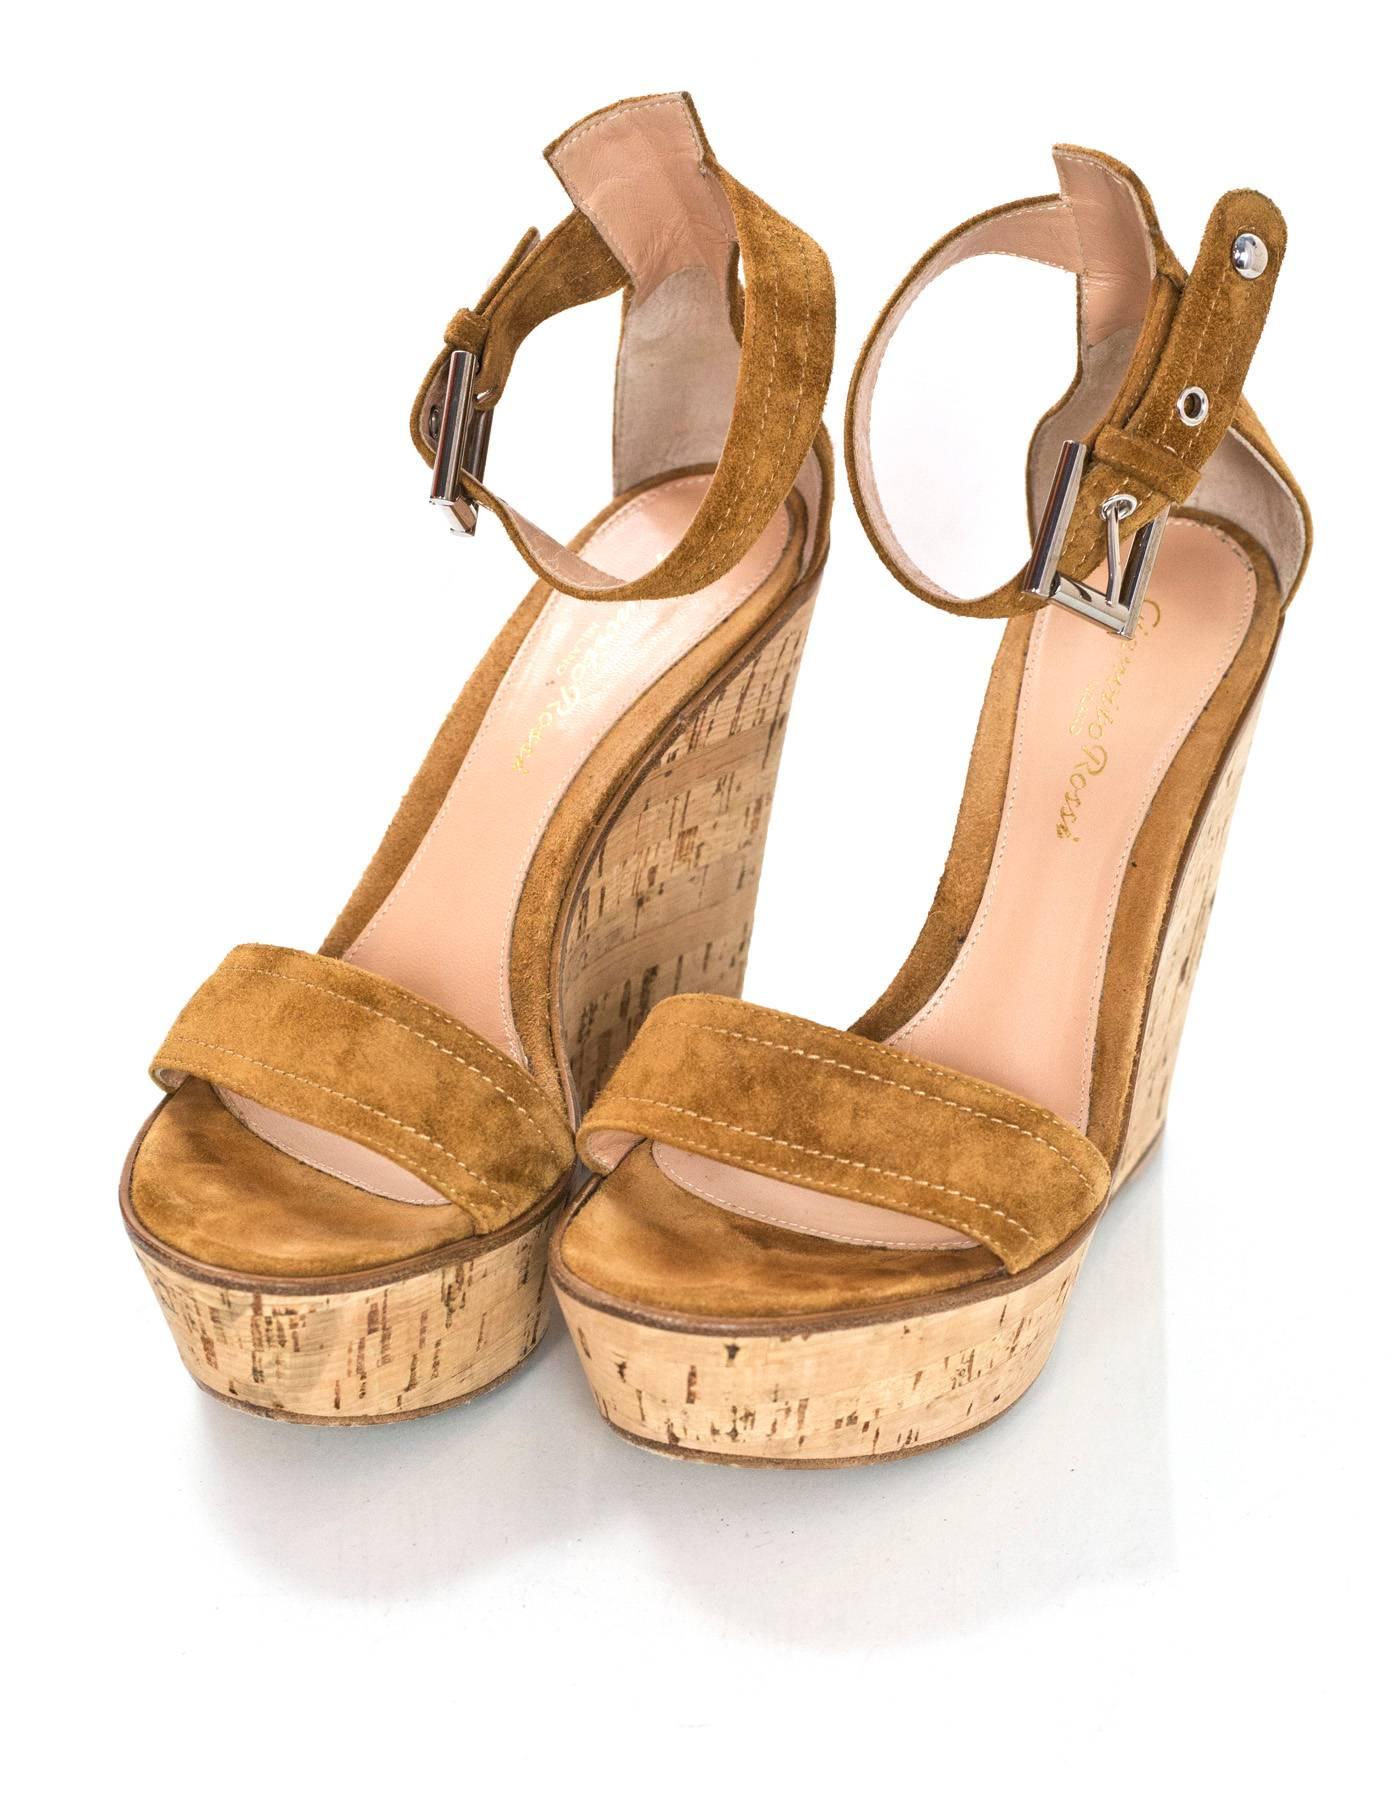 Gianvito Rossi Tan Suede & Cork Wedges Sz 36.5

Made In: Italy
Color: Tan
Materials: Suede, cork
Closure/Opening: Buckle closure at akle
Sole Stamp: Made in Italy Gianvito Rossi 36.5
Retail Price: $695 + tax
Overall Condition: Excellent pre-owned